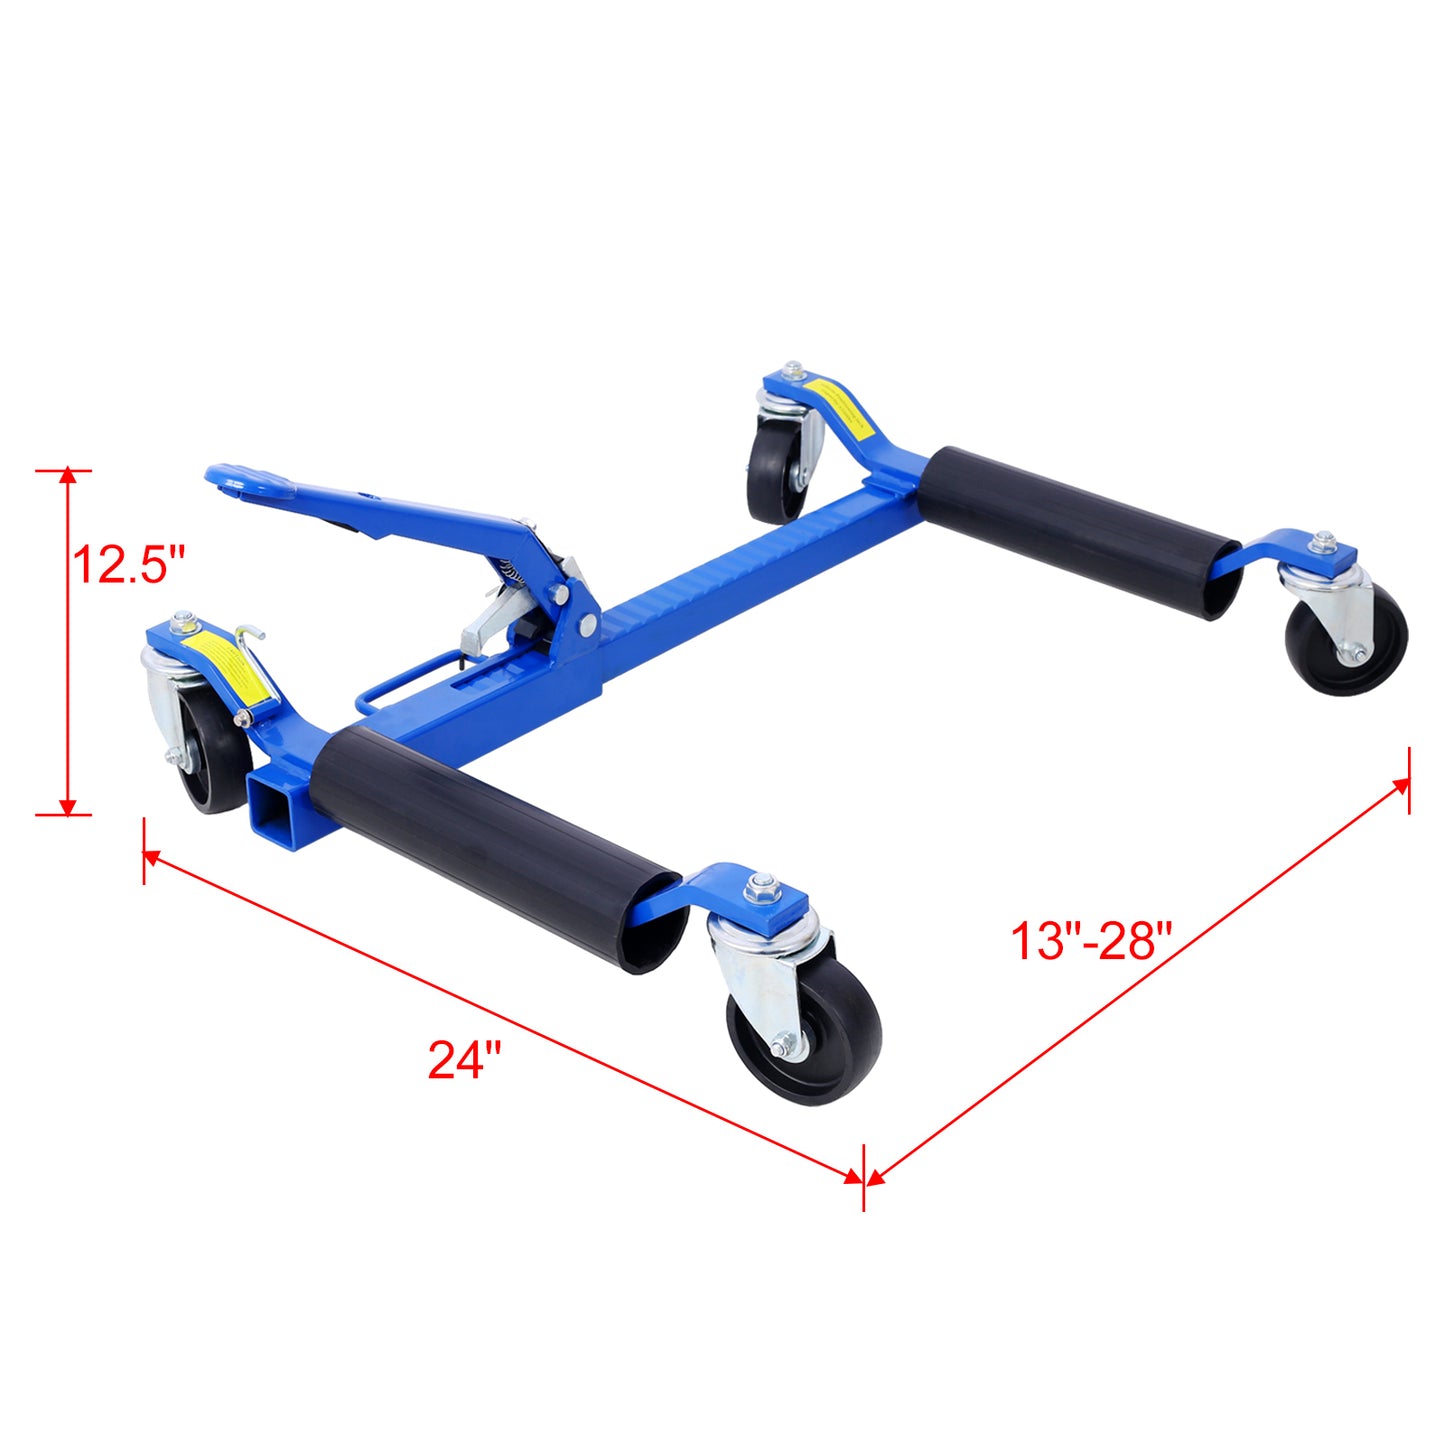 Set of (2) Wheel Dolly Car Skates Vehicle Positioning Hydraulic Tire Jack Ratcheting Foot Pedal Lift Hydraulic Car Wheel Dolly, 1,500lbs blue